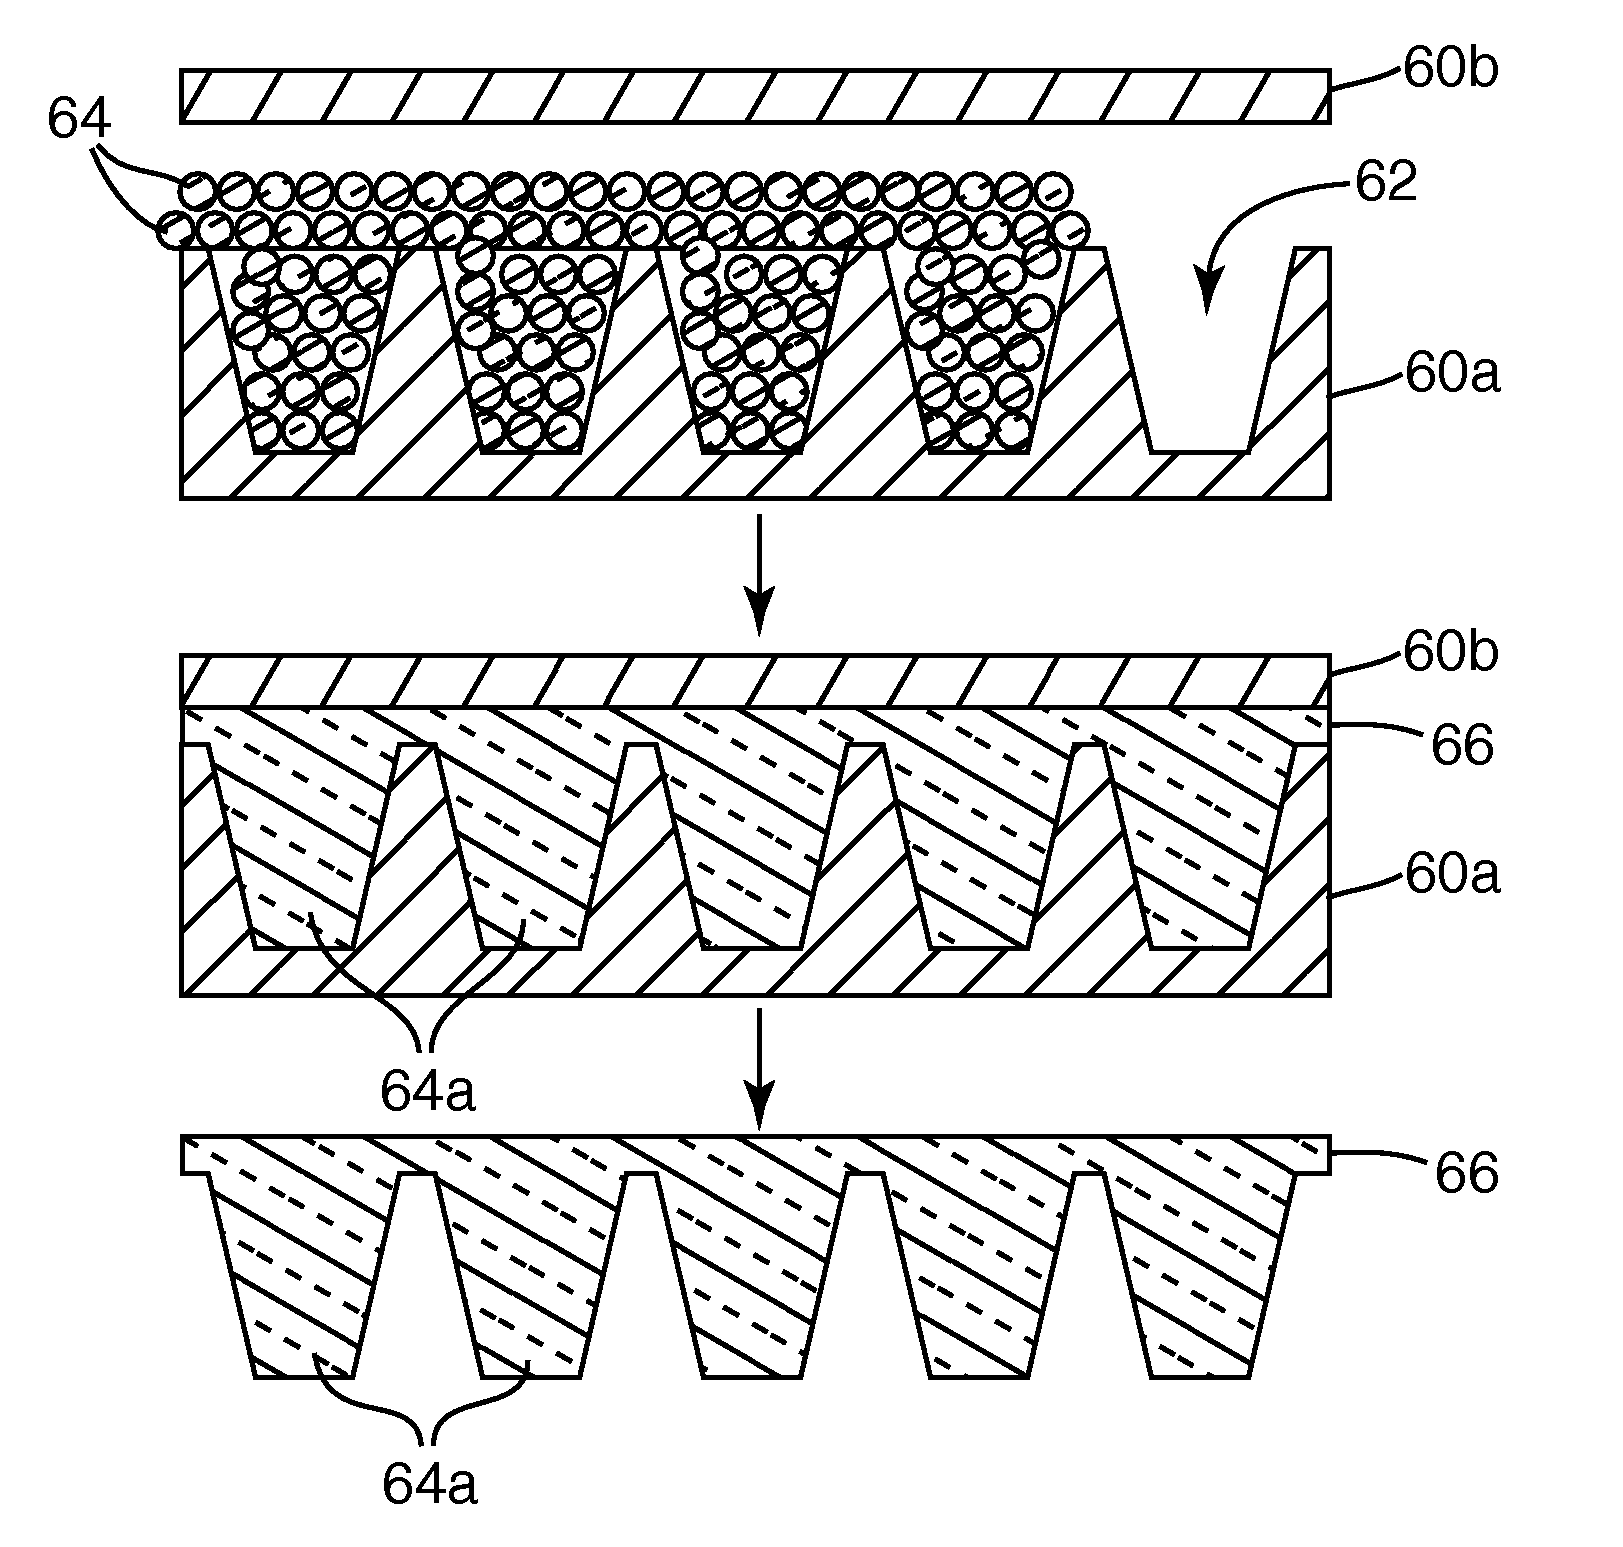 Methods of Making LED Extractor Arrays